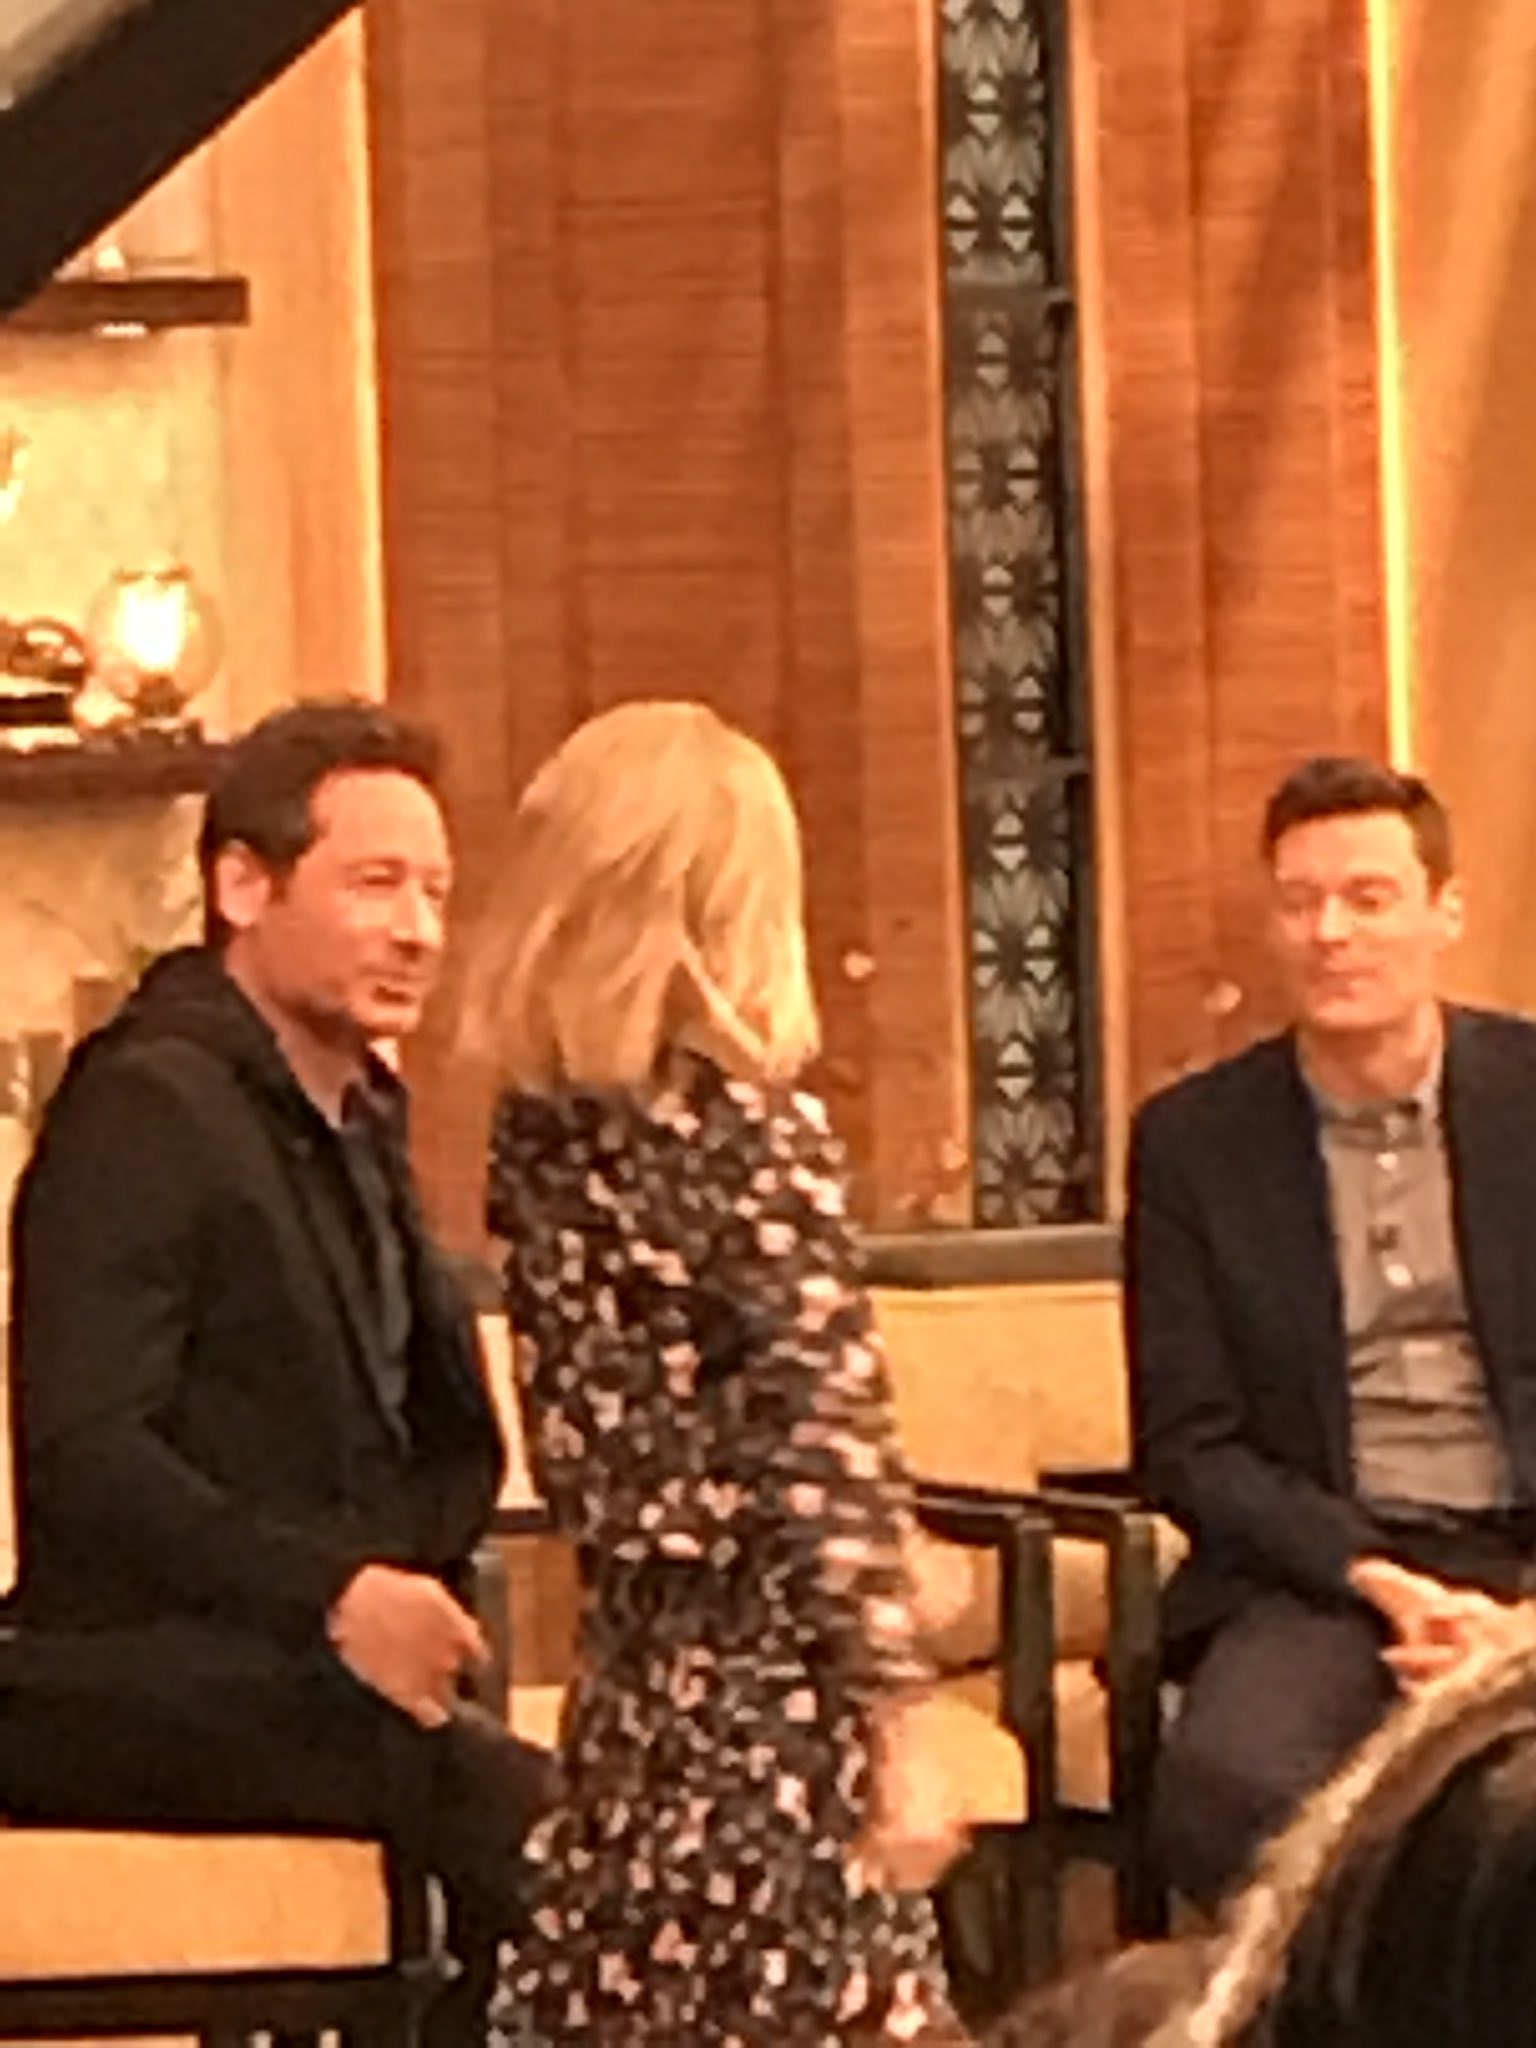 2018/04/30 - David on Live with Kelly and Ryan DcCcVxTVQAAOeKZ